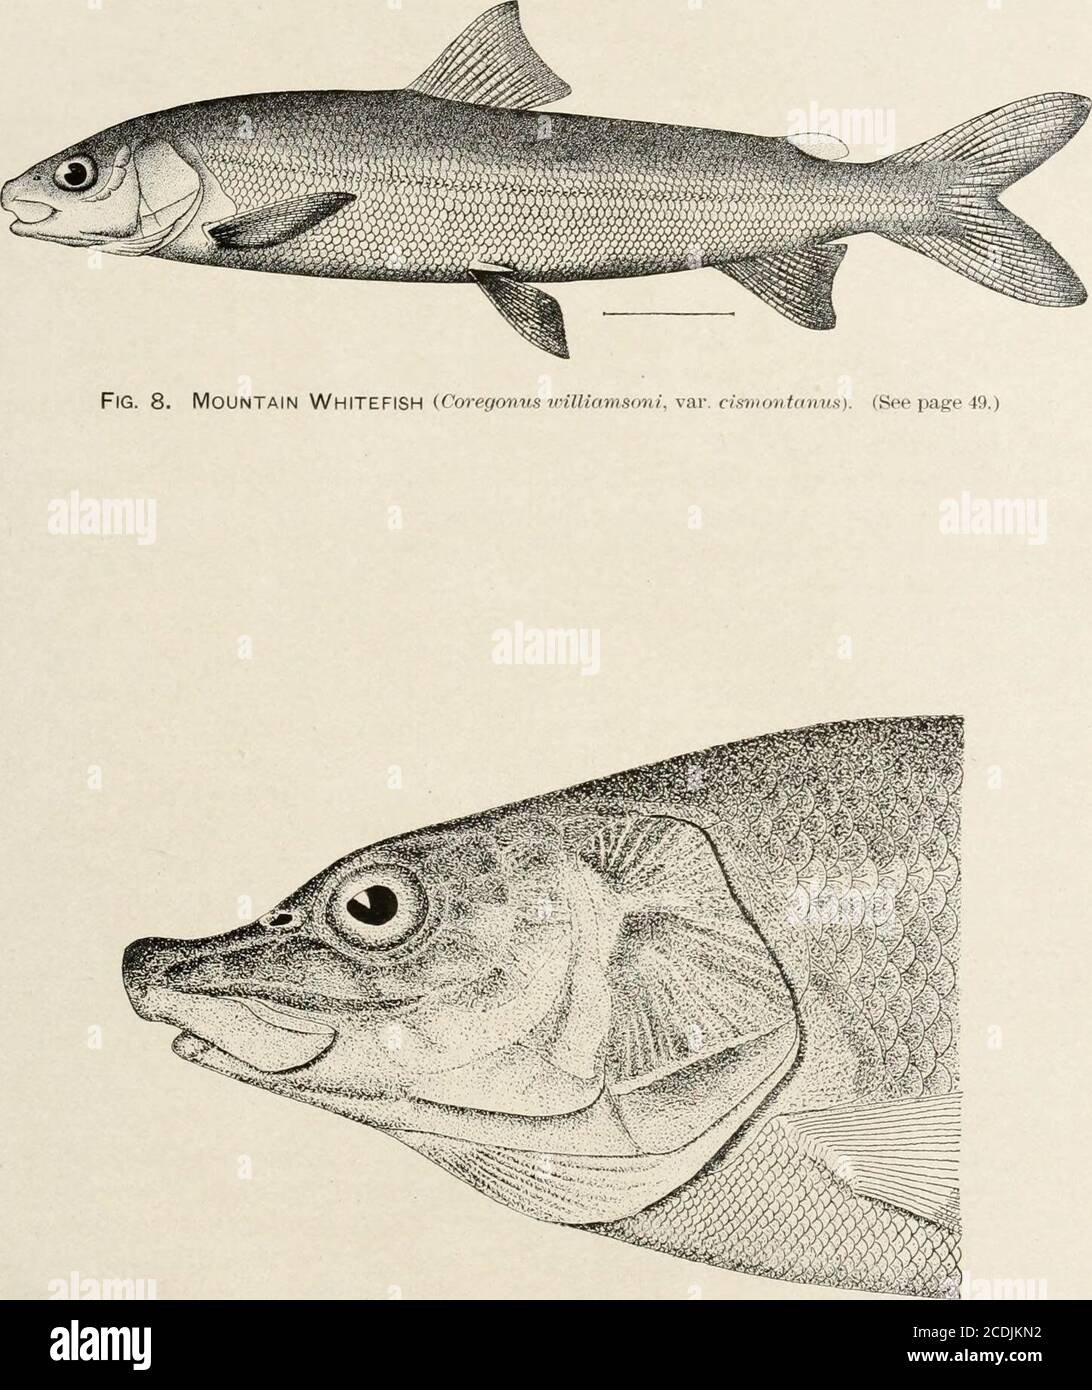 . Report of explorations in Colorado and Utah during the summer of 1889 : with an account of the fishes found in each of the river basins examined . in thePark : 1. Catostomus griseus Girard. {Acomua lactarius Girard ; Catostomus retropinnis Jordan.) (PlateVII, Fig. 1.) This sucker is abundant in the Yellowstone and Gardiner Rivers below the falls,and numerous young specimens were taken by us in Gardiner River near the bridgebelow the mouth of the Hot River. No large examples were seen, but the species issaid to reach a length of 18 inches. These specimens apparently belong to the form describ Stock Photo